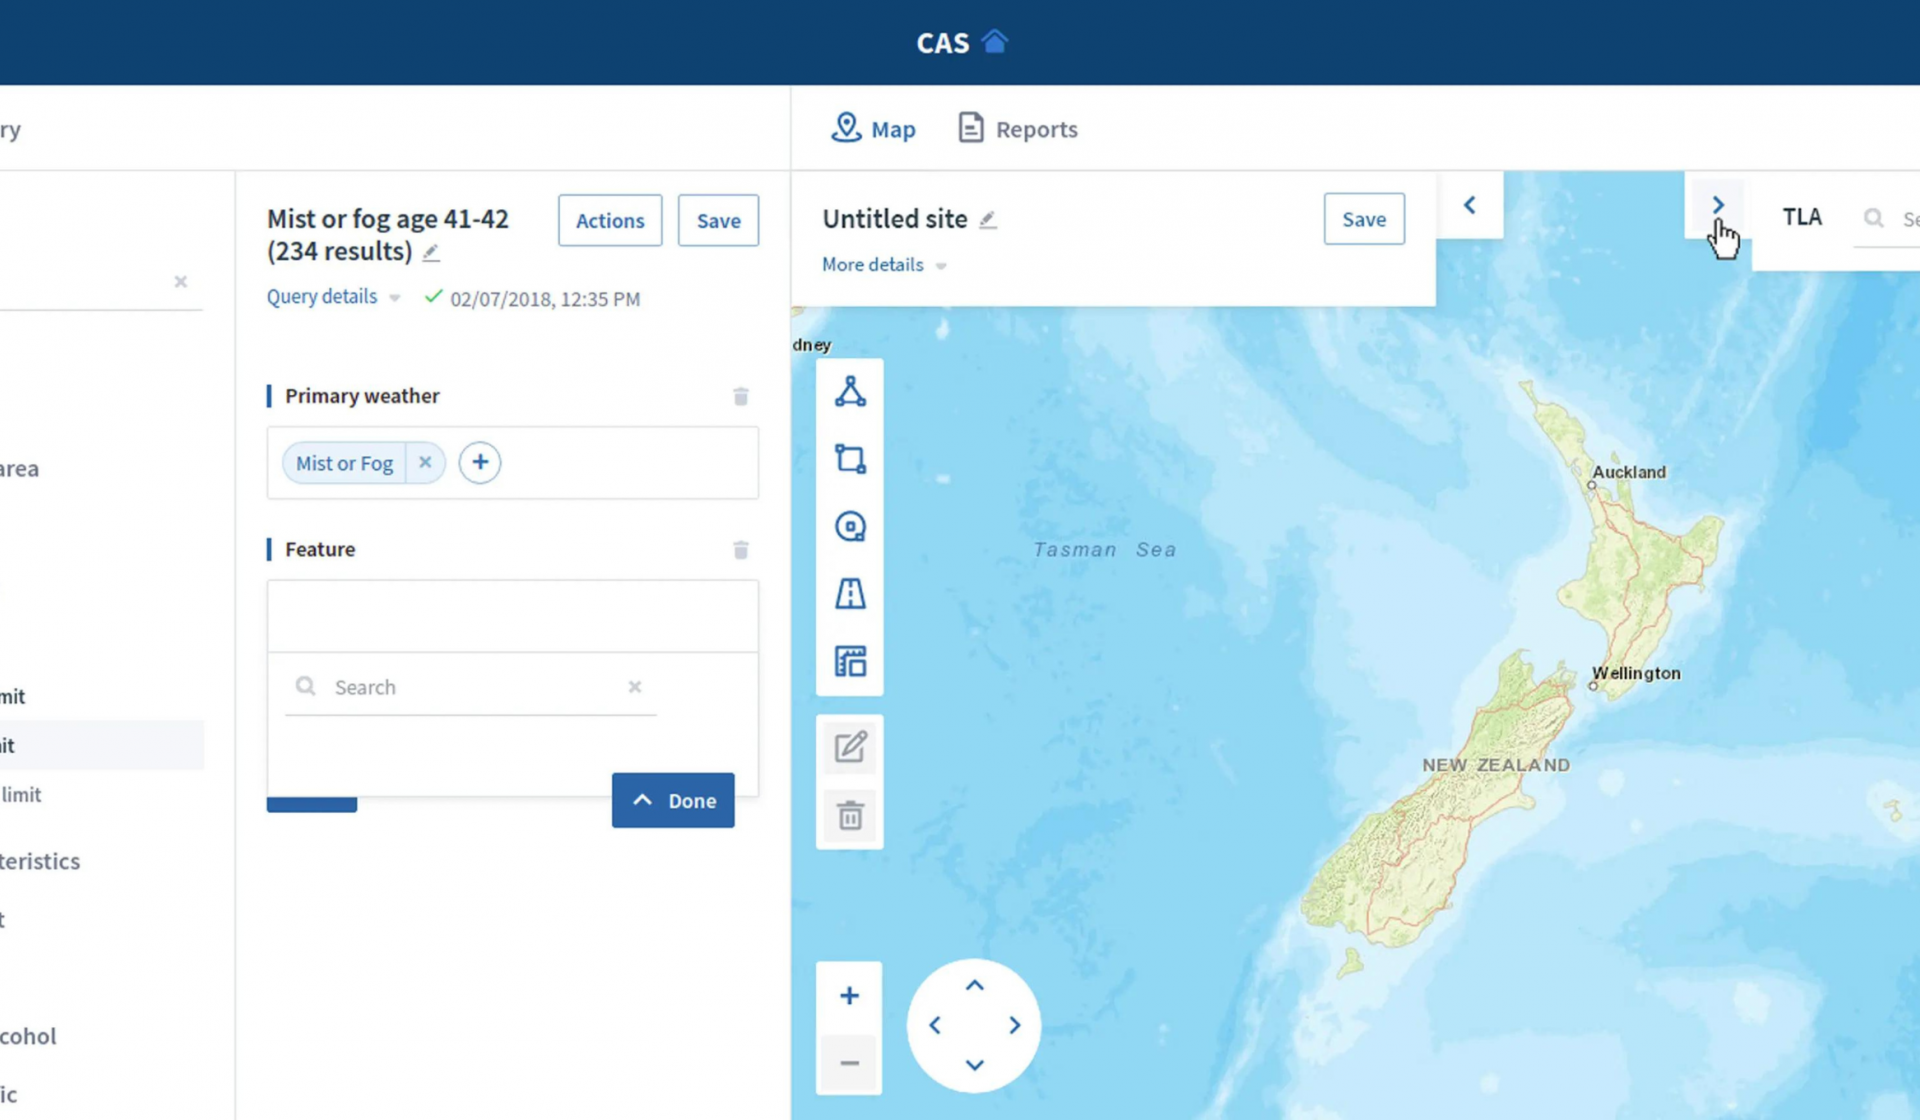 Screenshot of Crash Analysis System website displaying a map of New Zealand and options to search